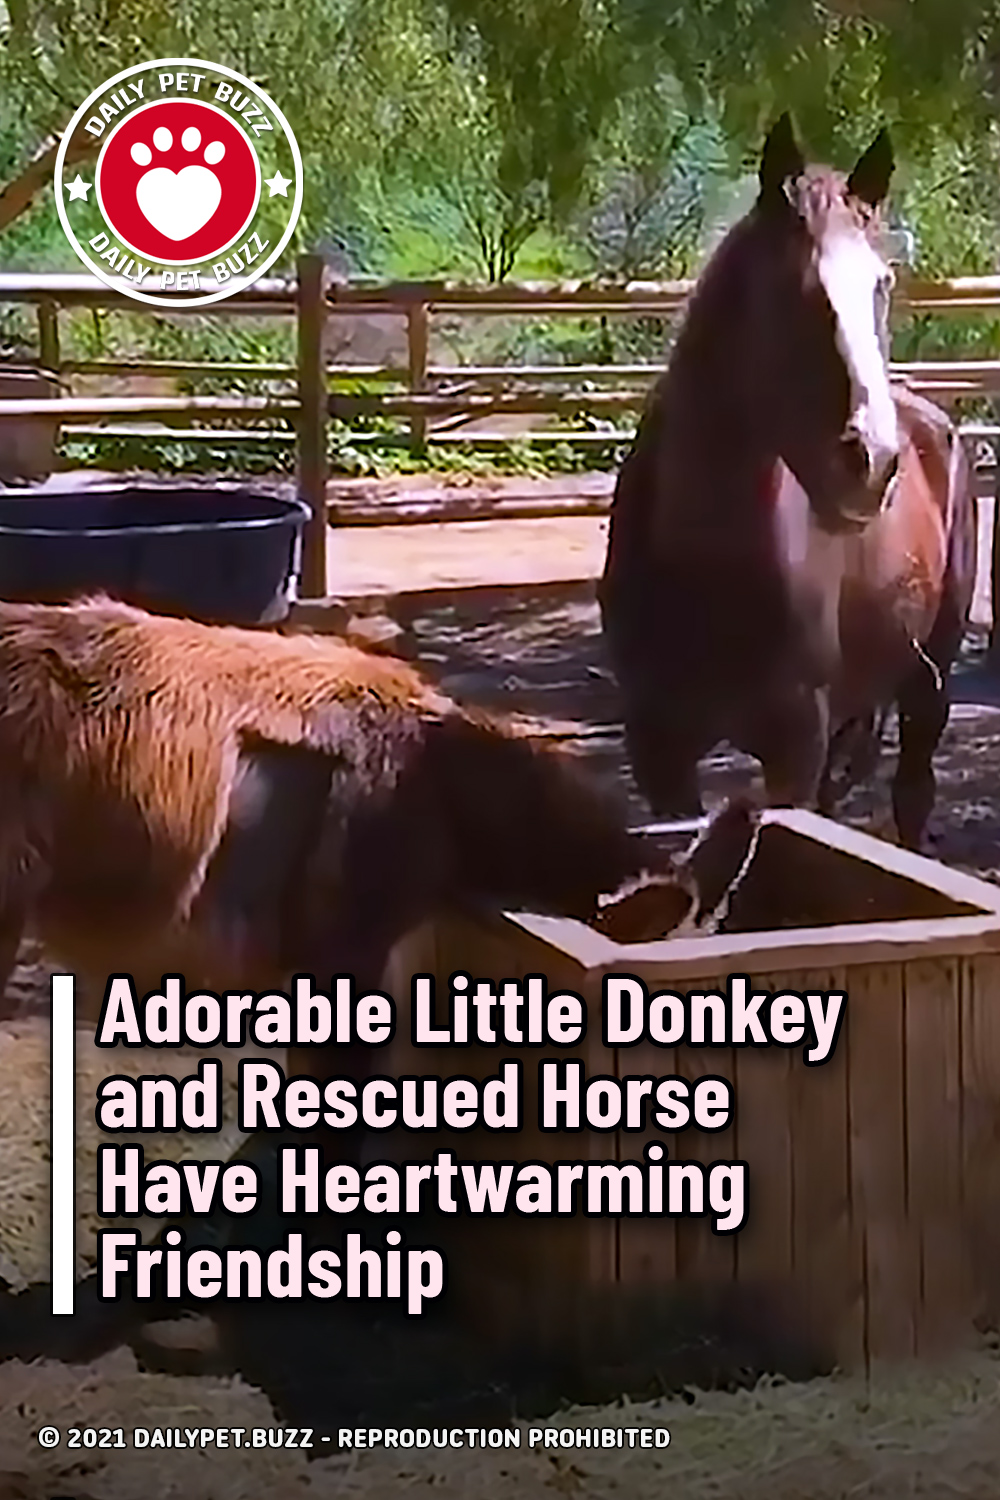 Adorable Little Donkey and Rescued Horse Have Heartwarming Friendship